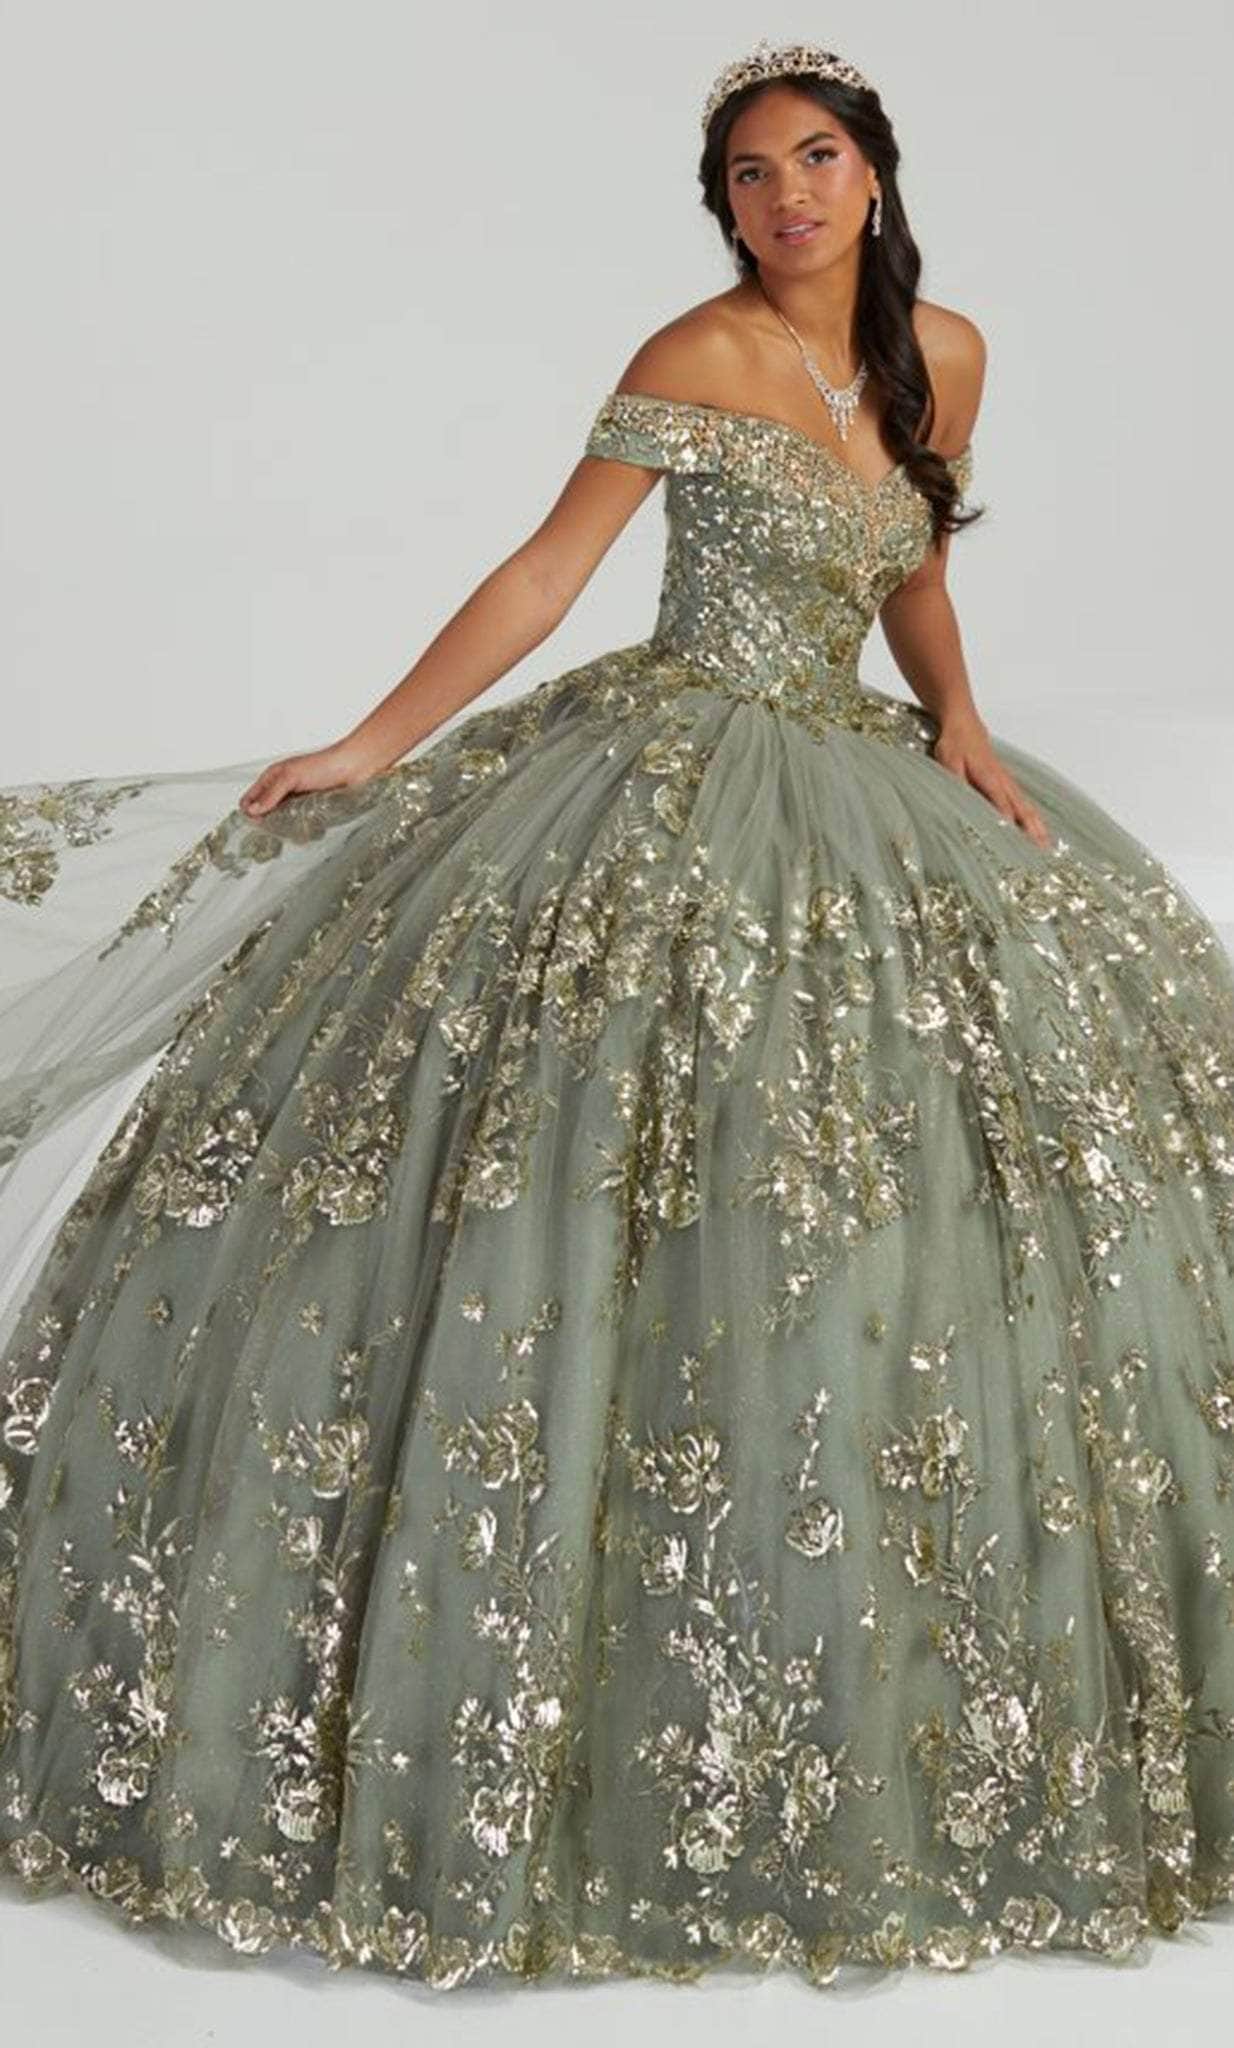 Image of Fiesta Gowns 56479 - Off Shoulder Sequined Voluminous Gown